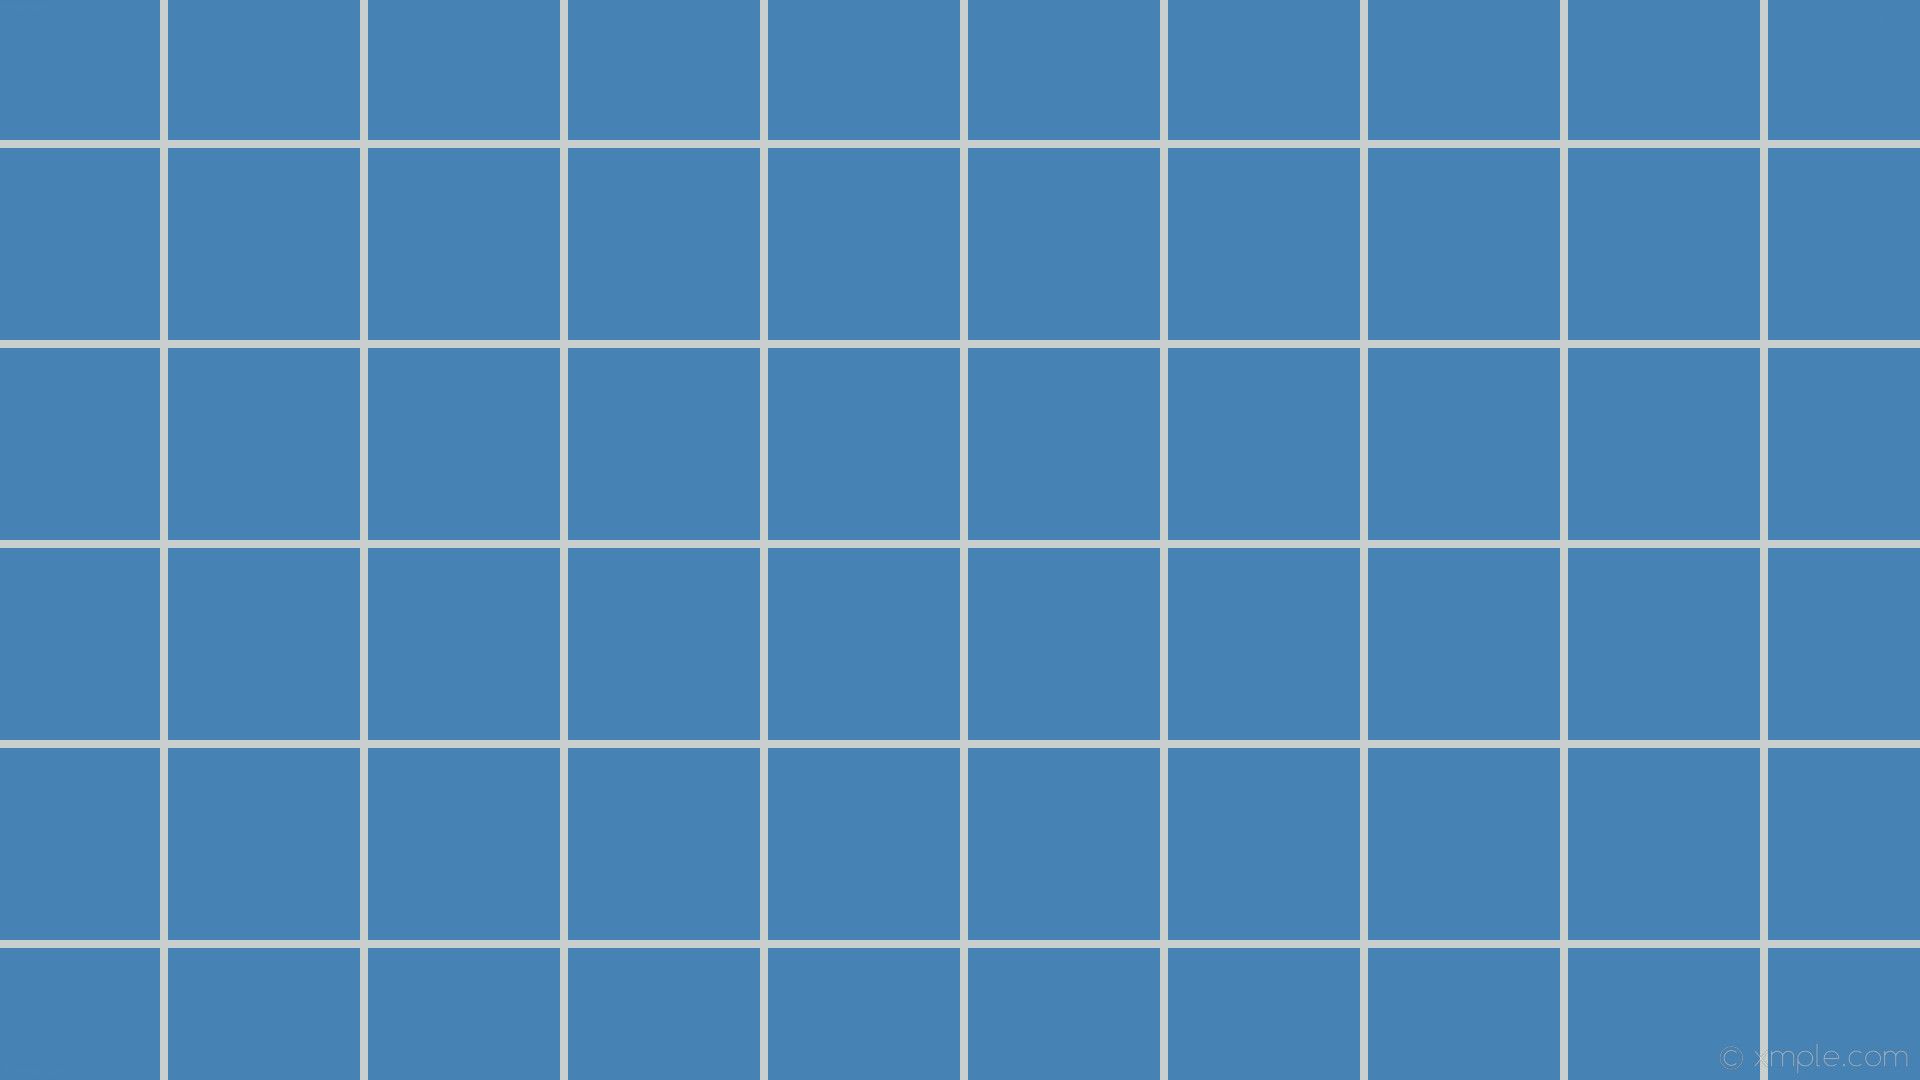 A blue tile pattern with white lines - Grid